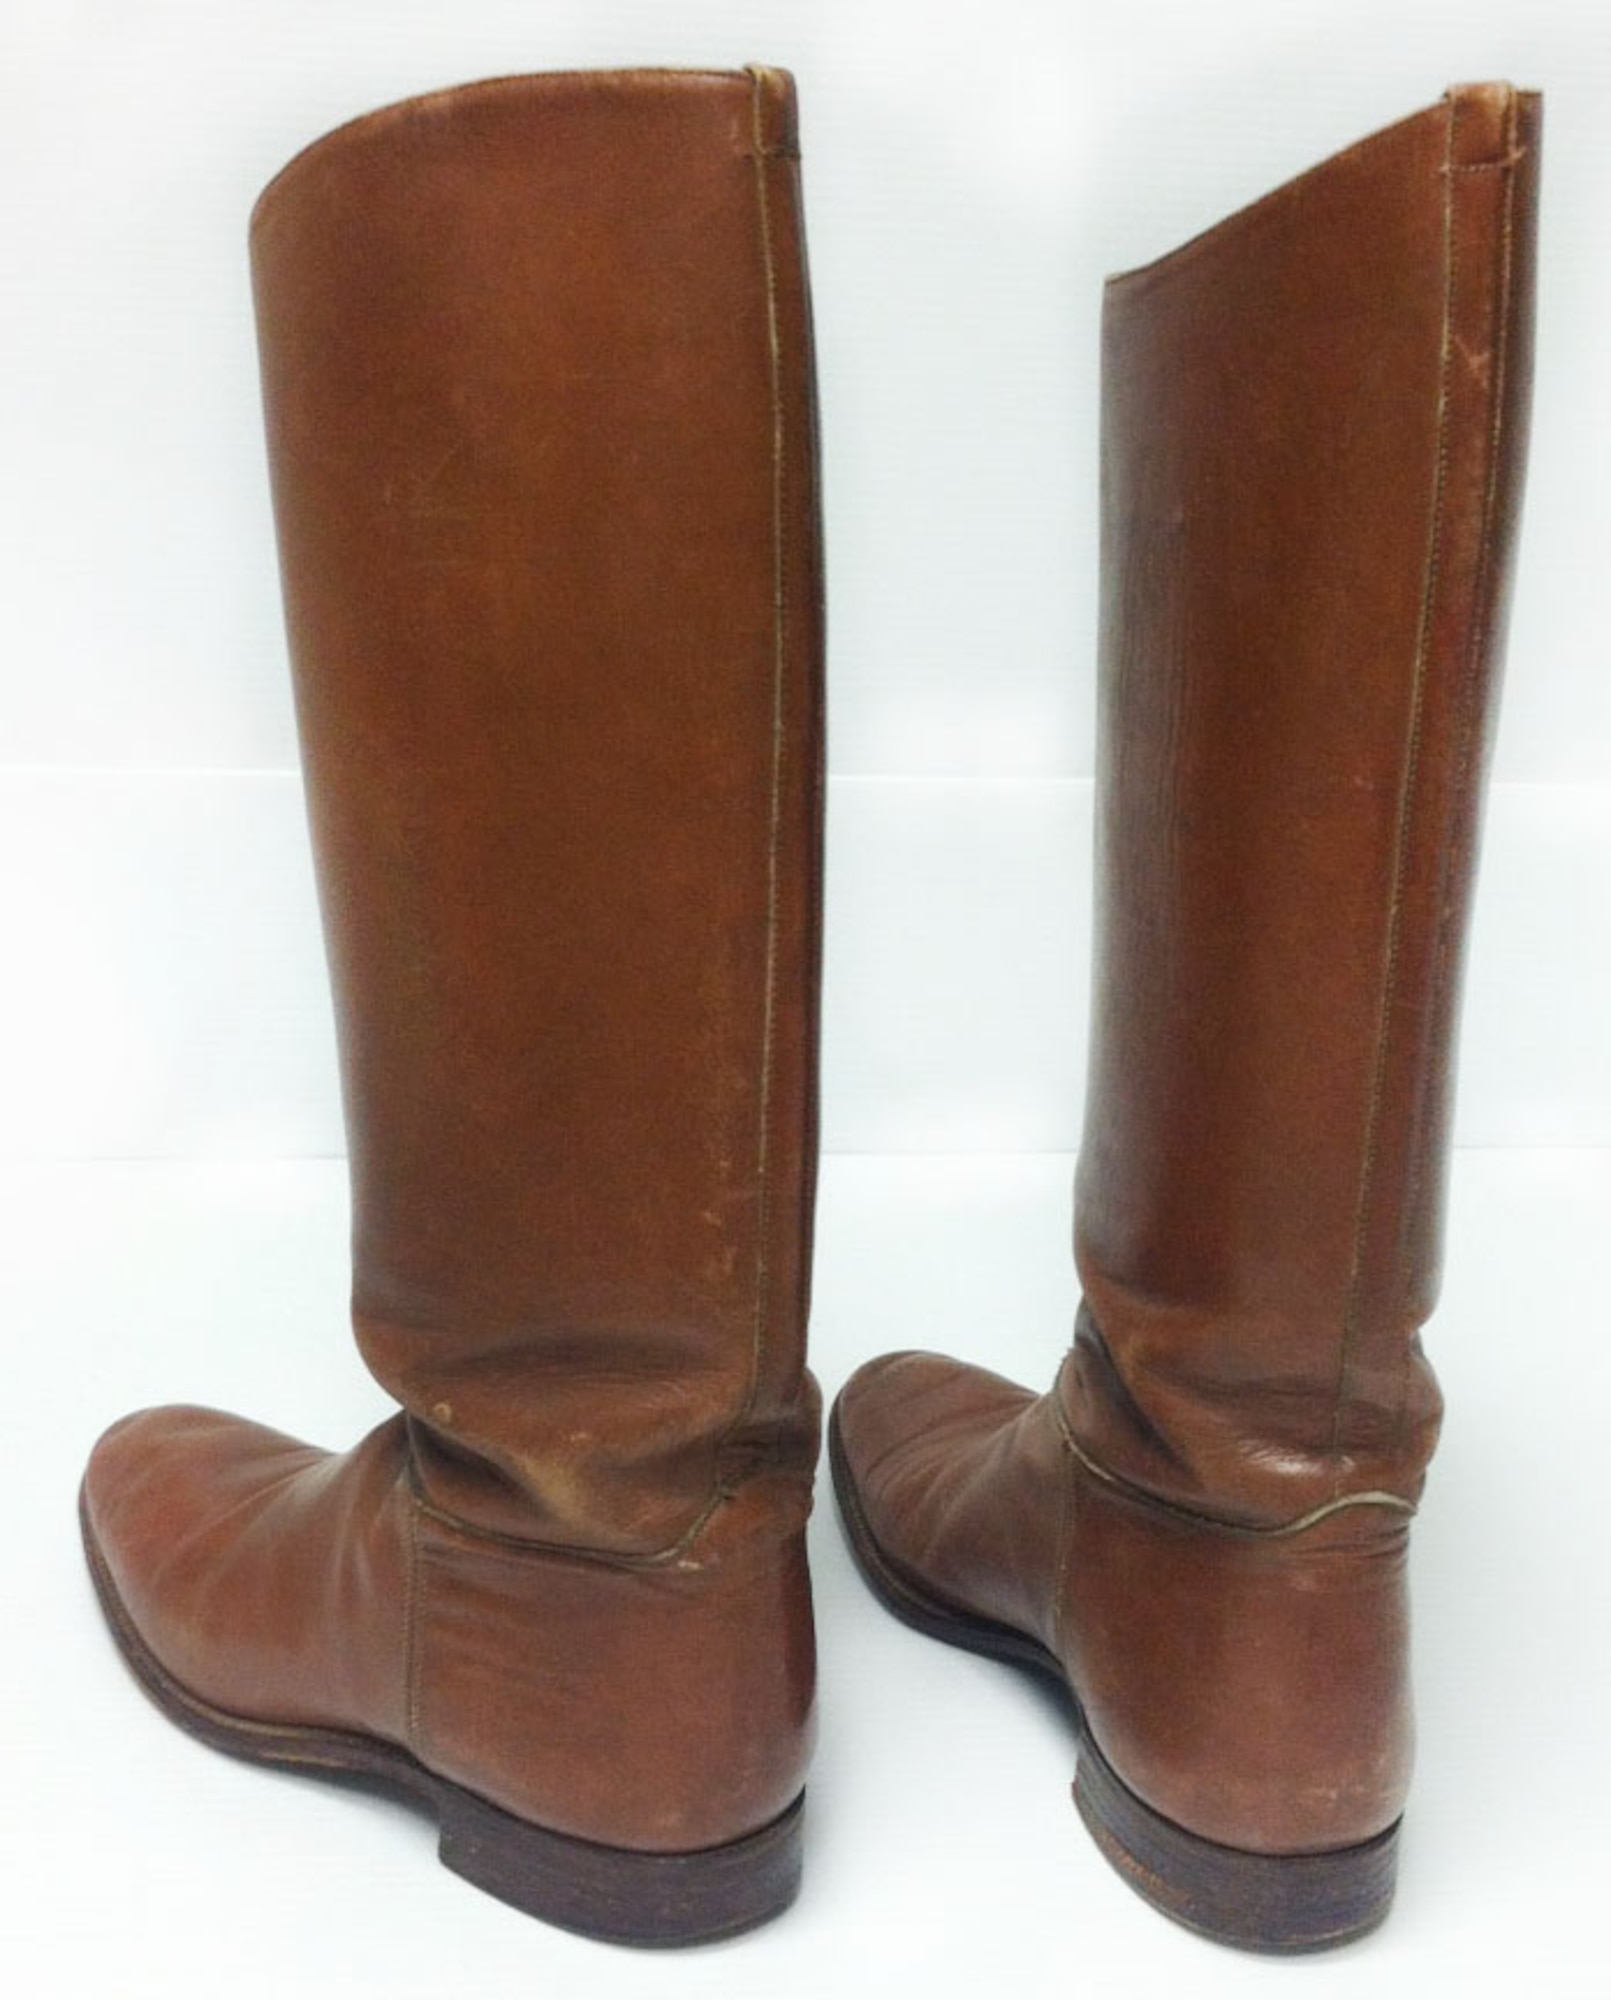 Leather riding boots were worn by members of the U.S. Cavalry Units during World War I. The tall shafts of these riding boots helped to protect cavalry soldiers' lower legs from debris kicked up by their horses, as well as protecting from riding impact against their horses. Horses were used during WWI for logistical support and reconnaissance, as well as for pulling equipment such as field guns, supply wagons and ambulances. (U.S. Air Force photo)